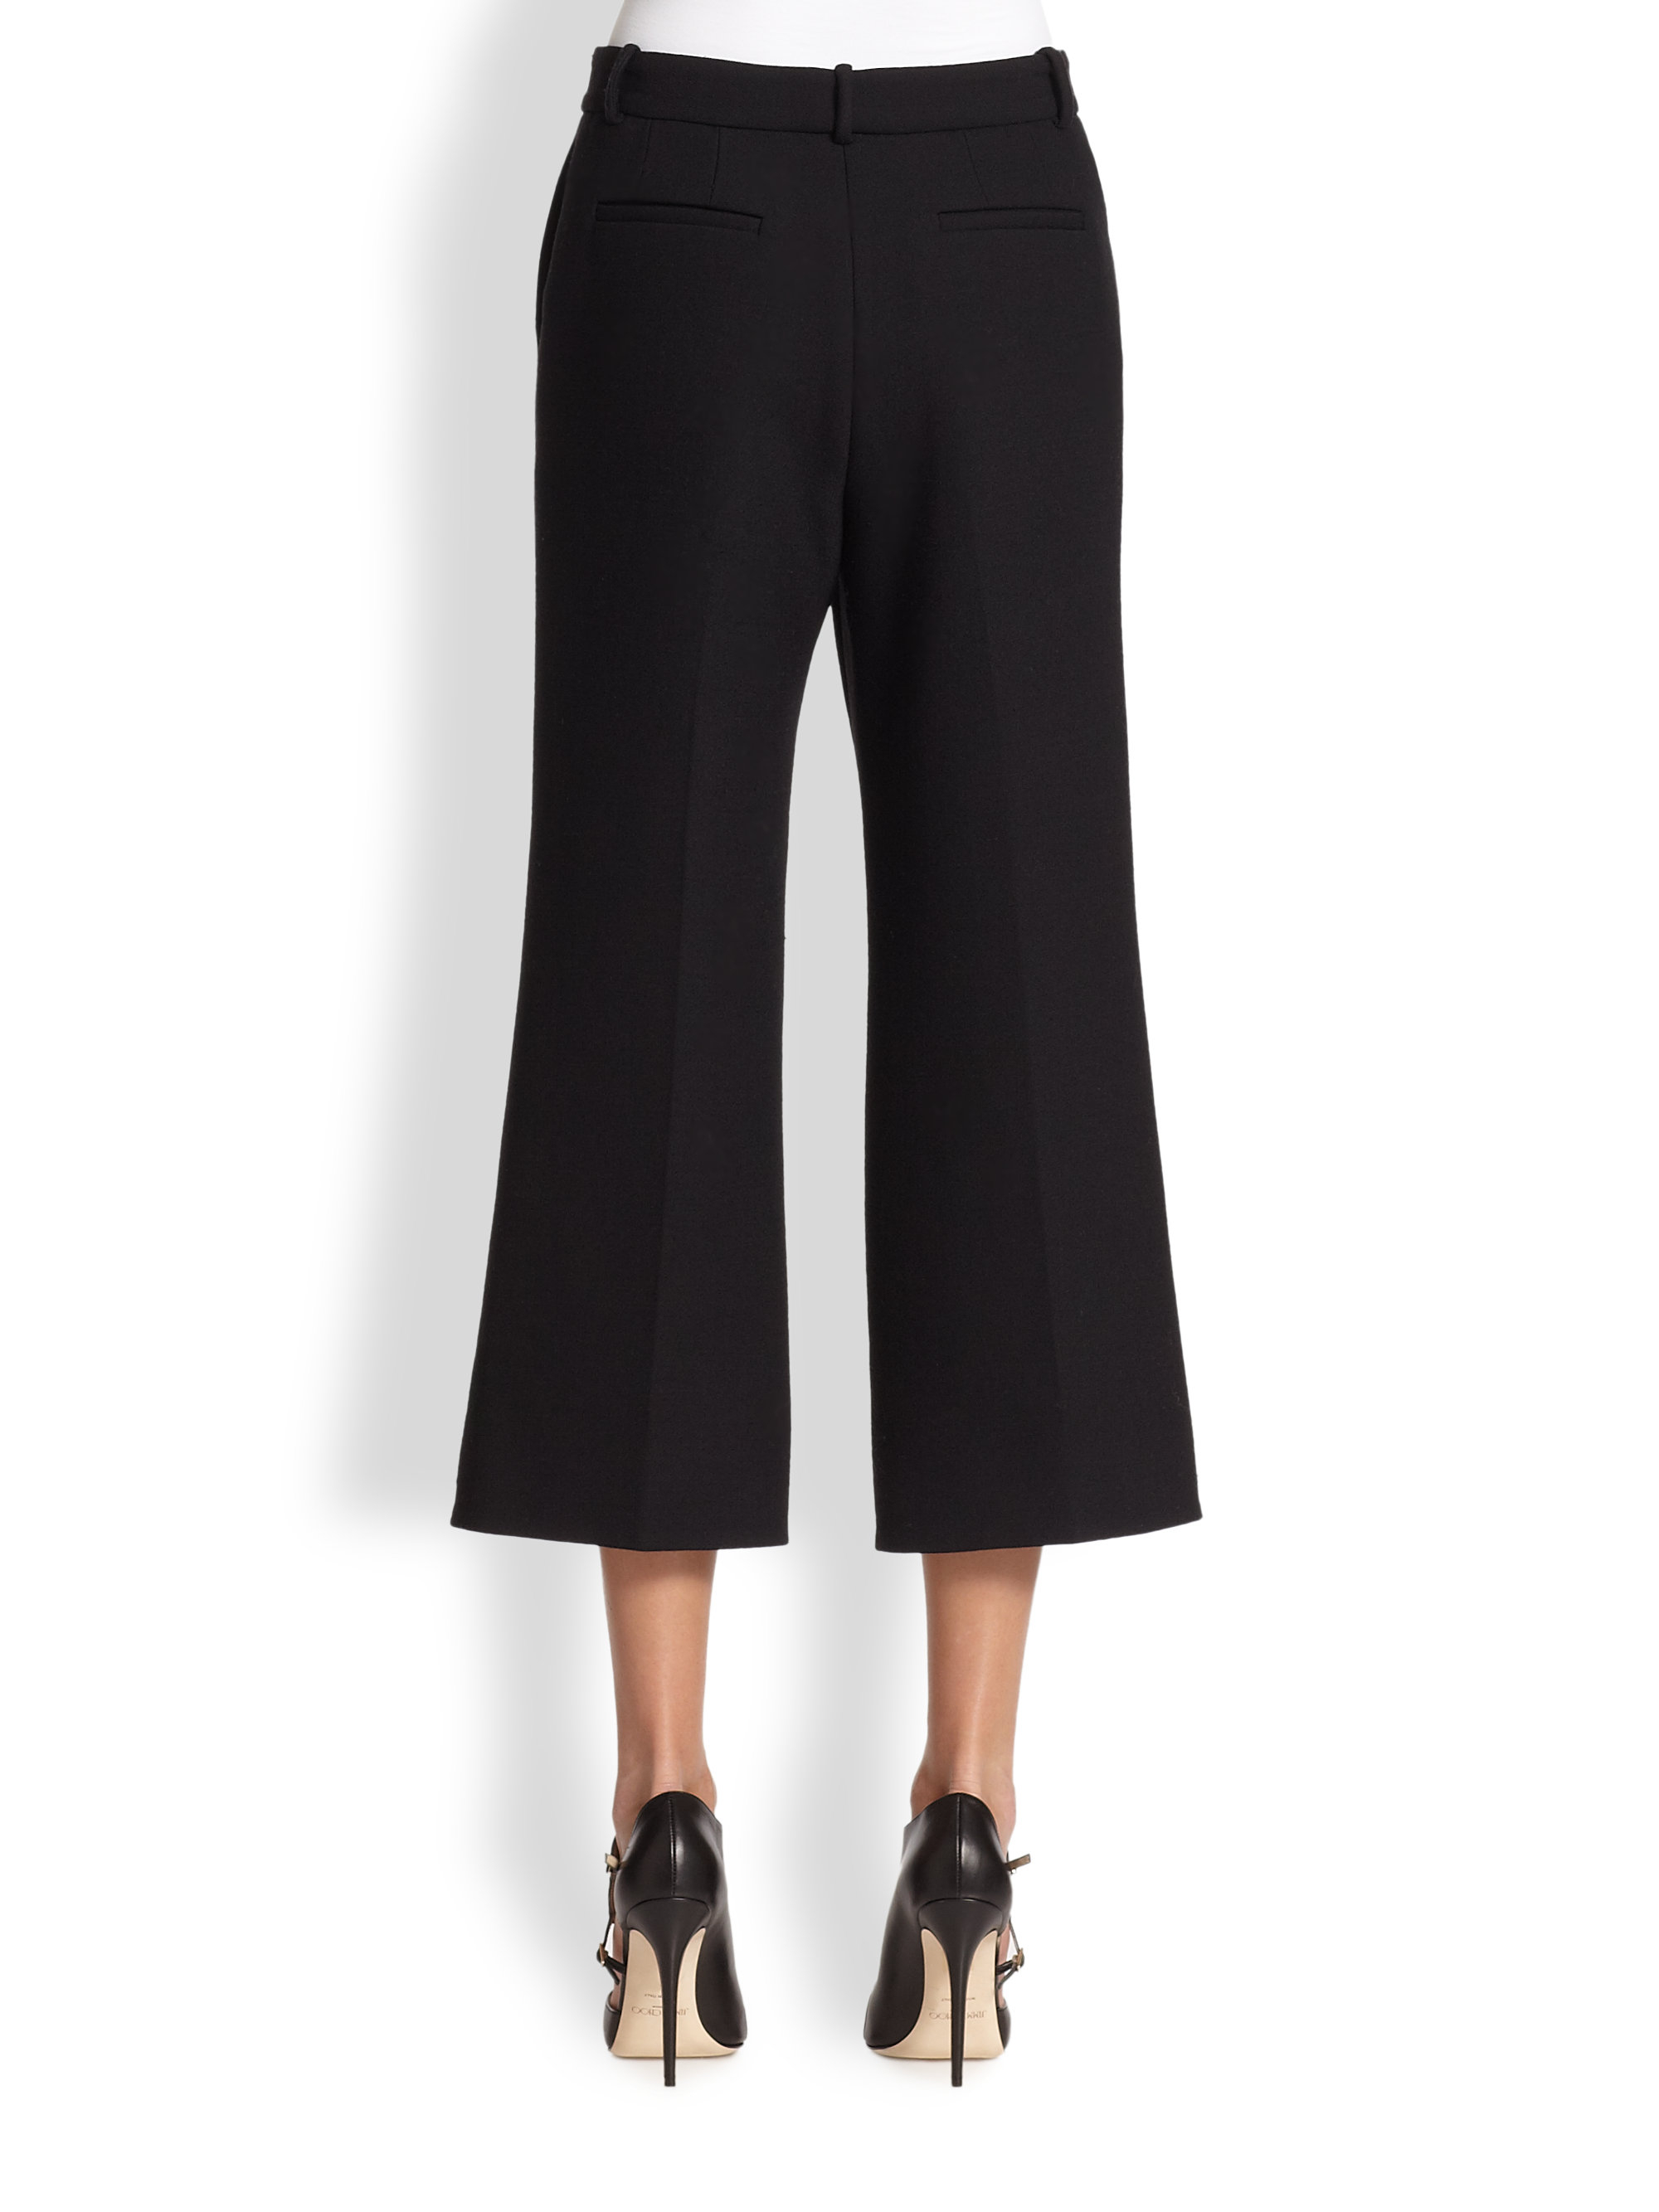 Lyst - Theory Inza Wide-Leg Cropped Pants in Black